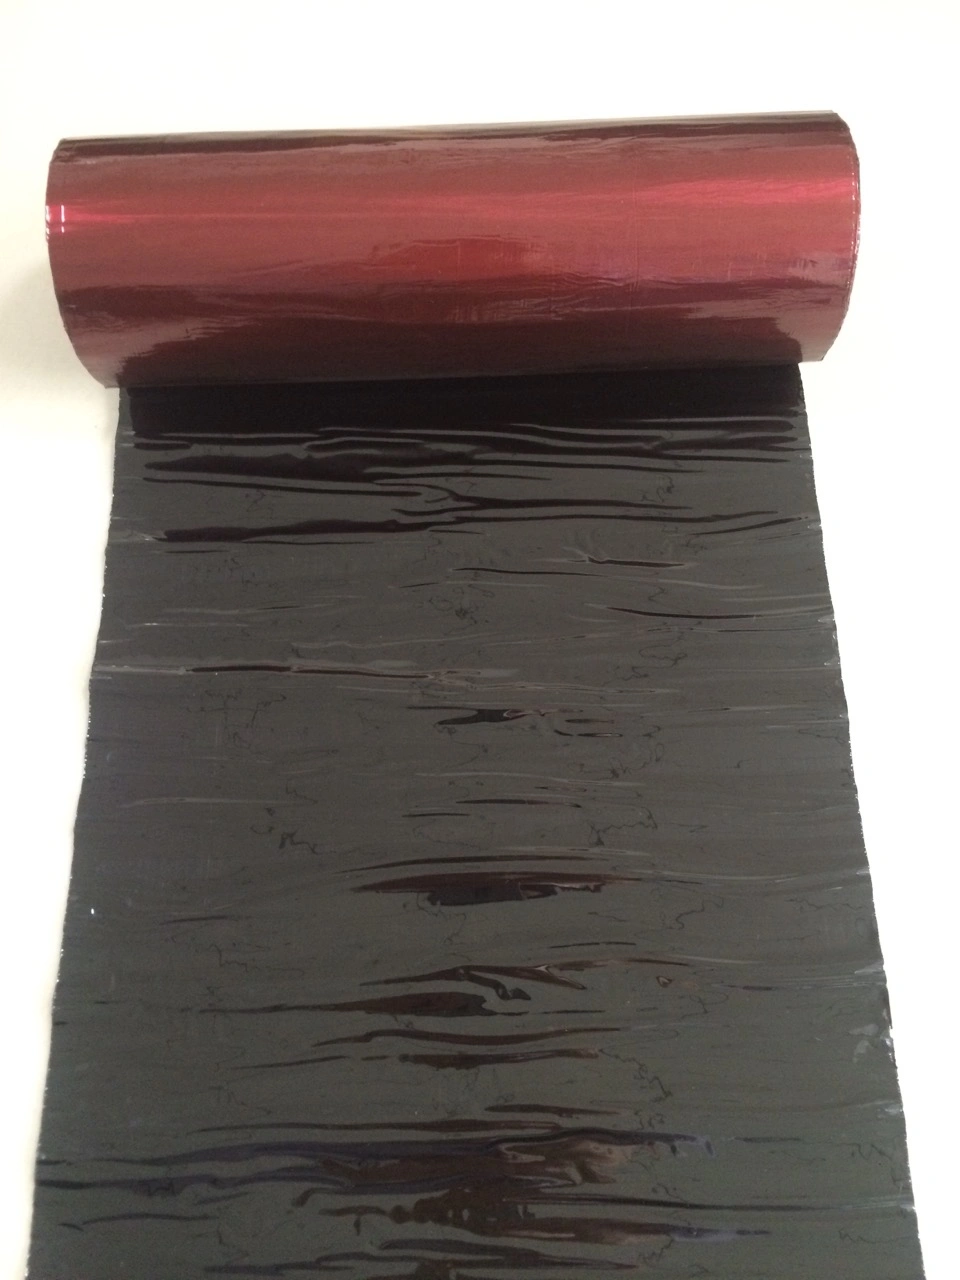 Self-Adhesive Hatch Cover Tape with Bitumen